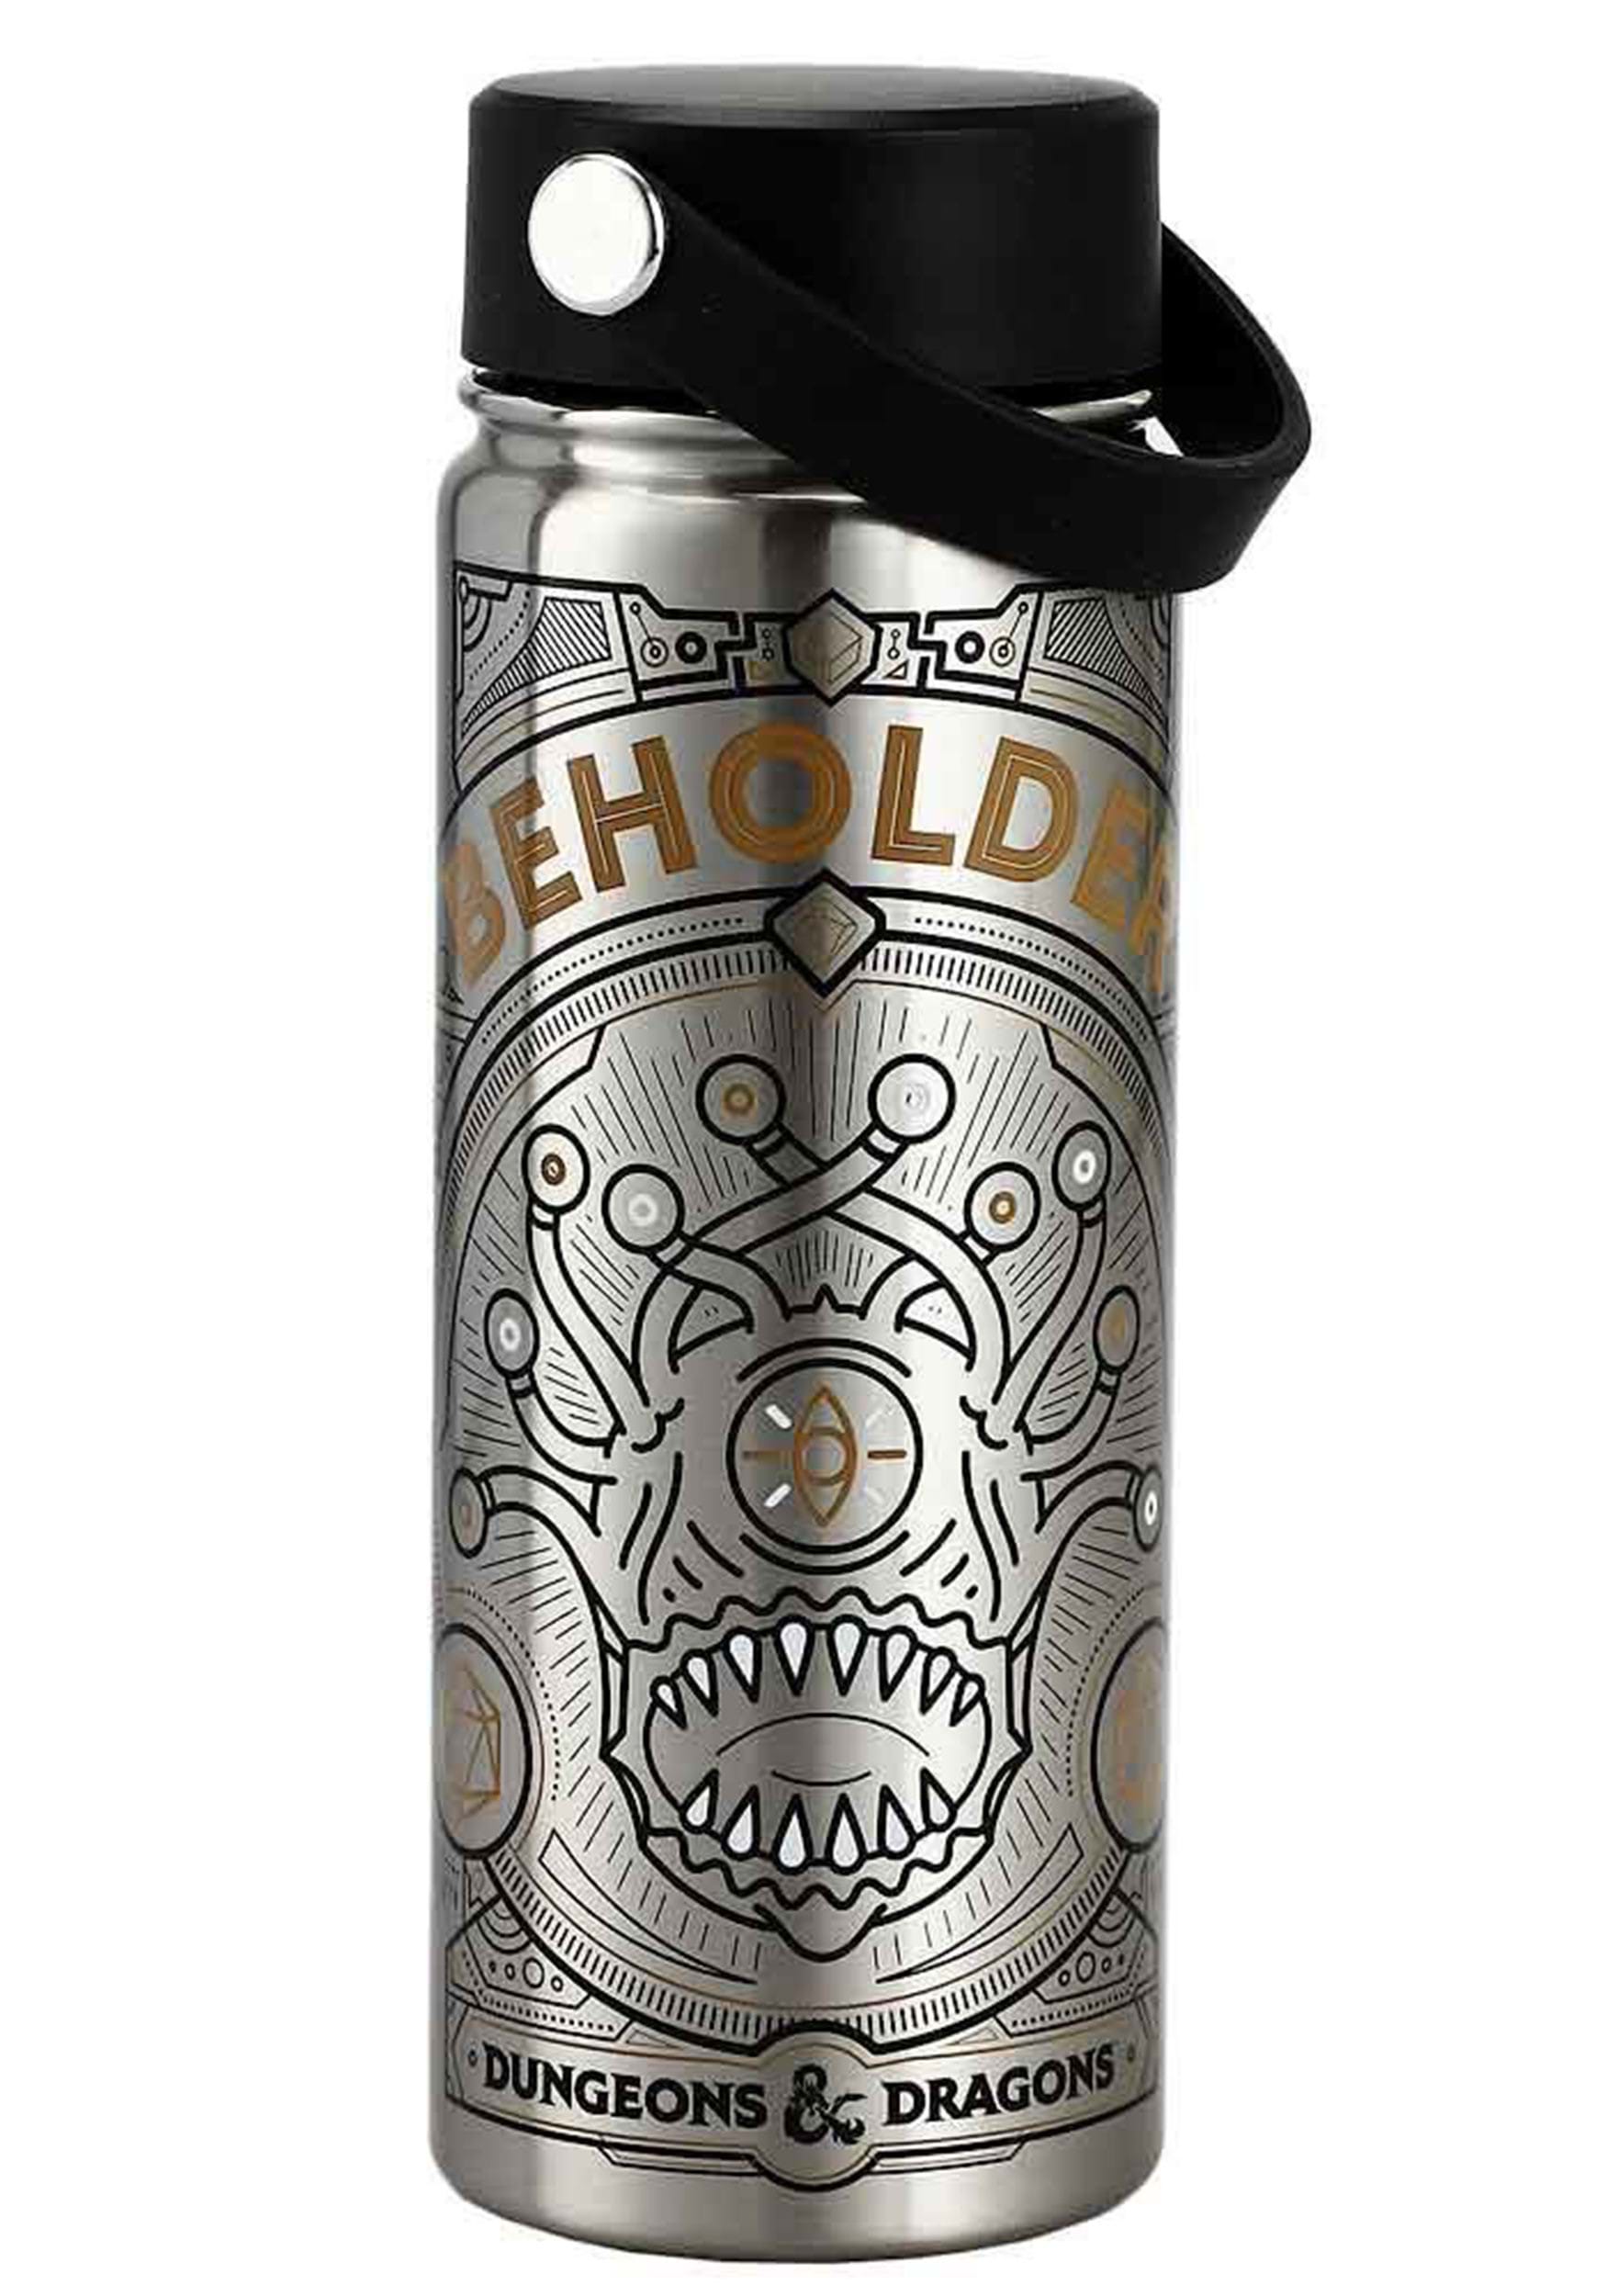 https://images.fun.com/products/80296/1-1/dungeons-dragons-beholder-17-oz-stainless-steel-upd.jpg